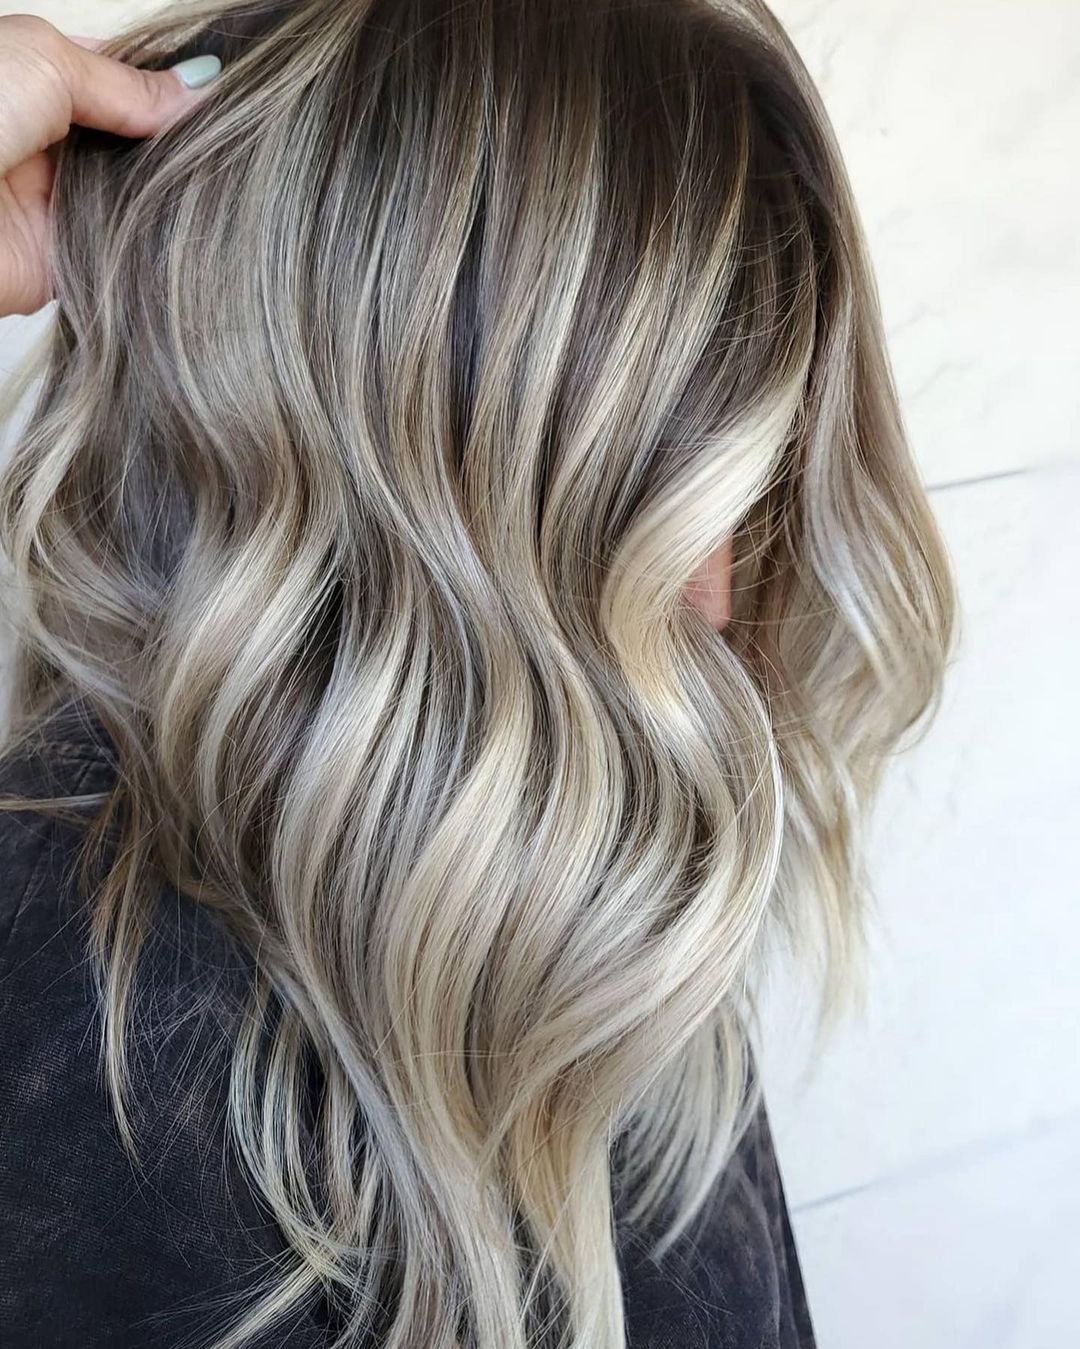 50 Awesome Long Layered Hair Ideas For 2021 images 35